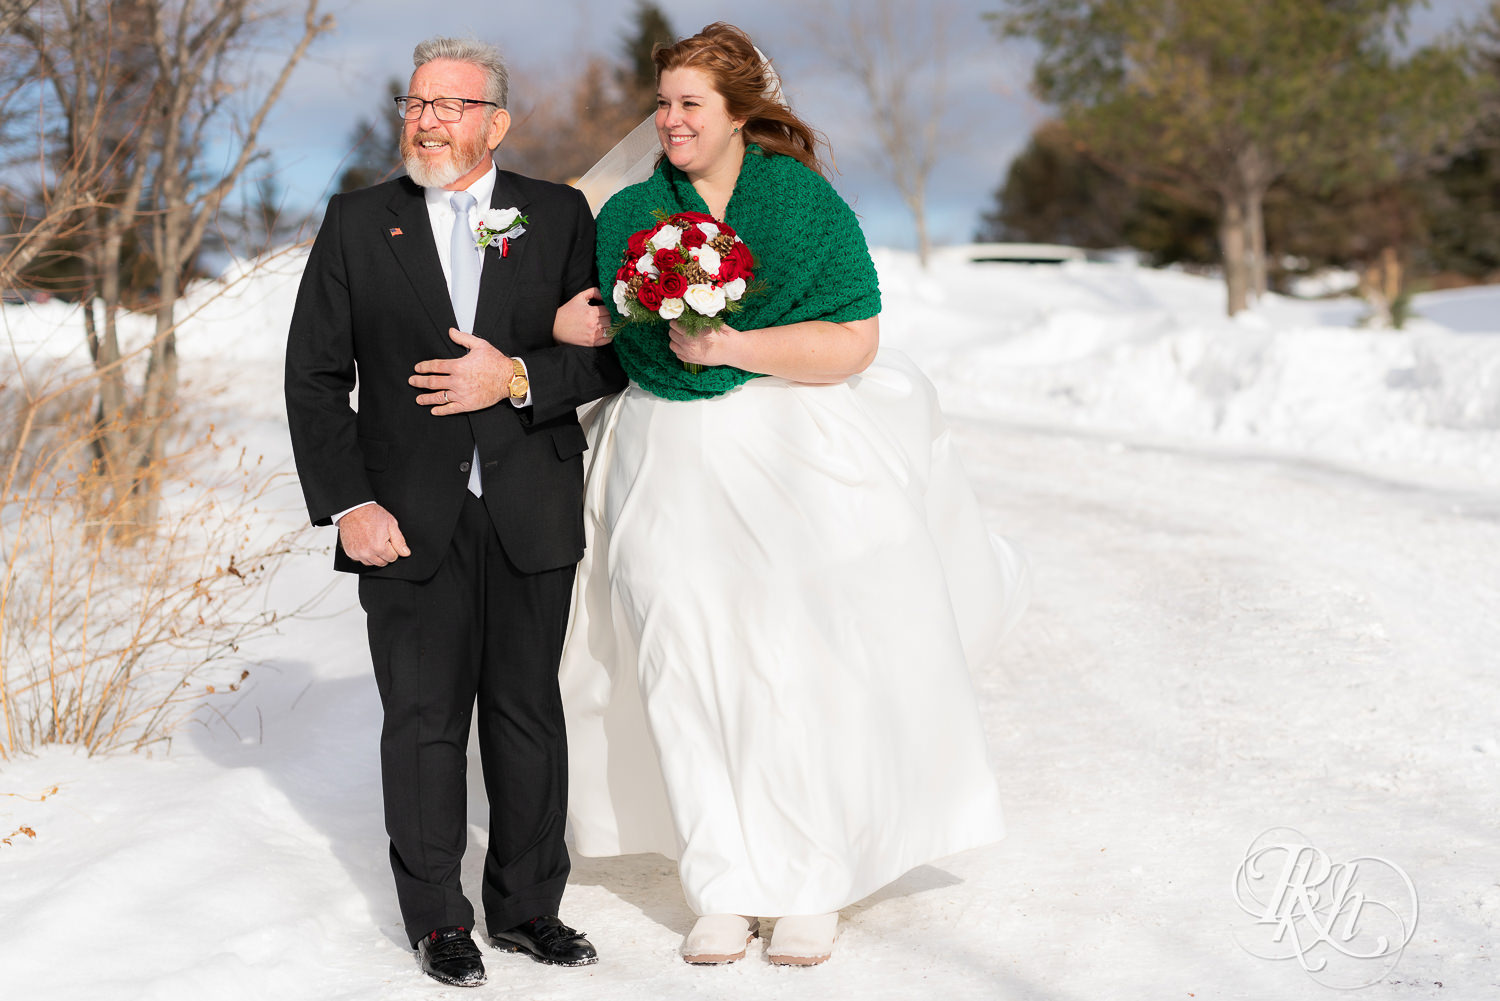 Bride walking down the aisle in the snow at Grand Superior Lodge in Two Harbors, Minnesota.